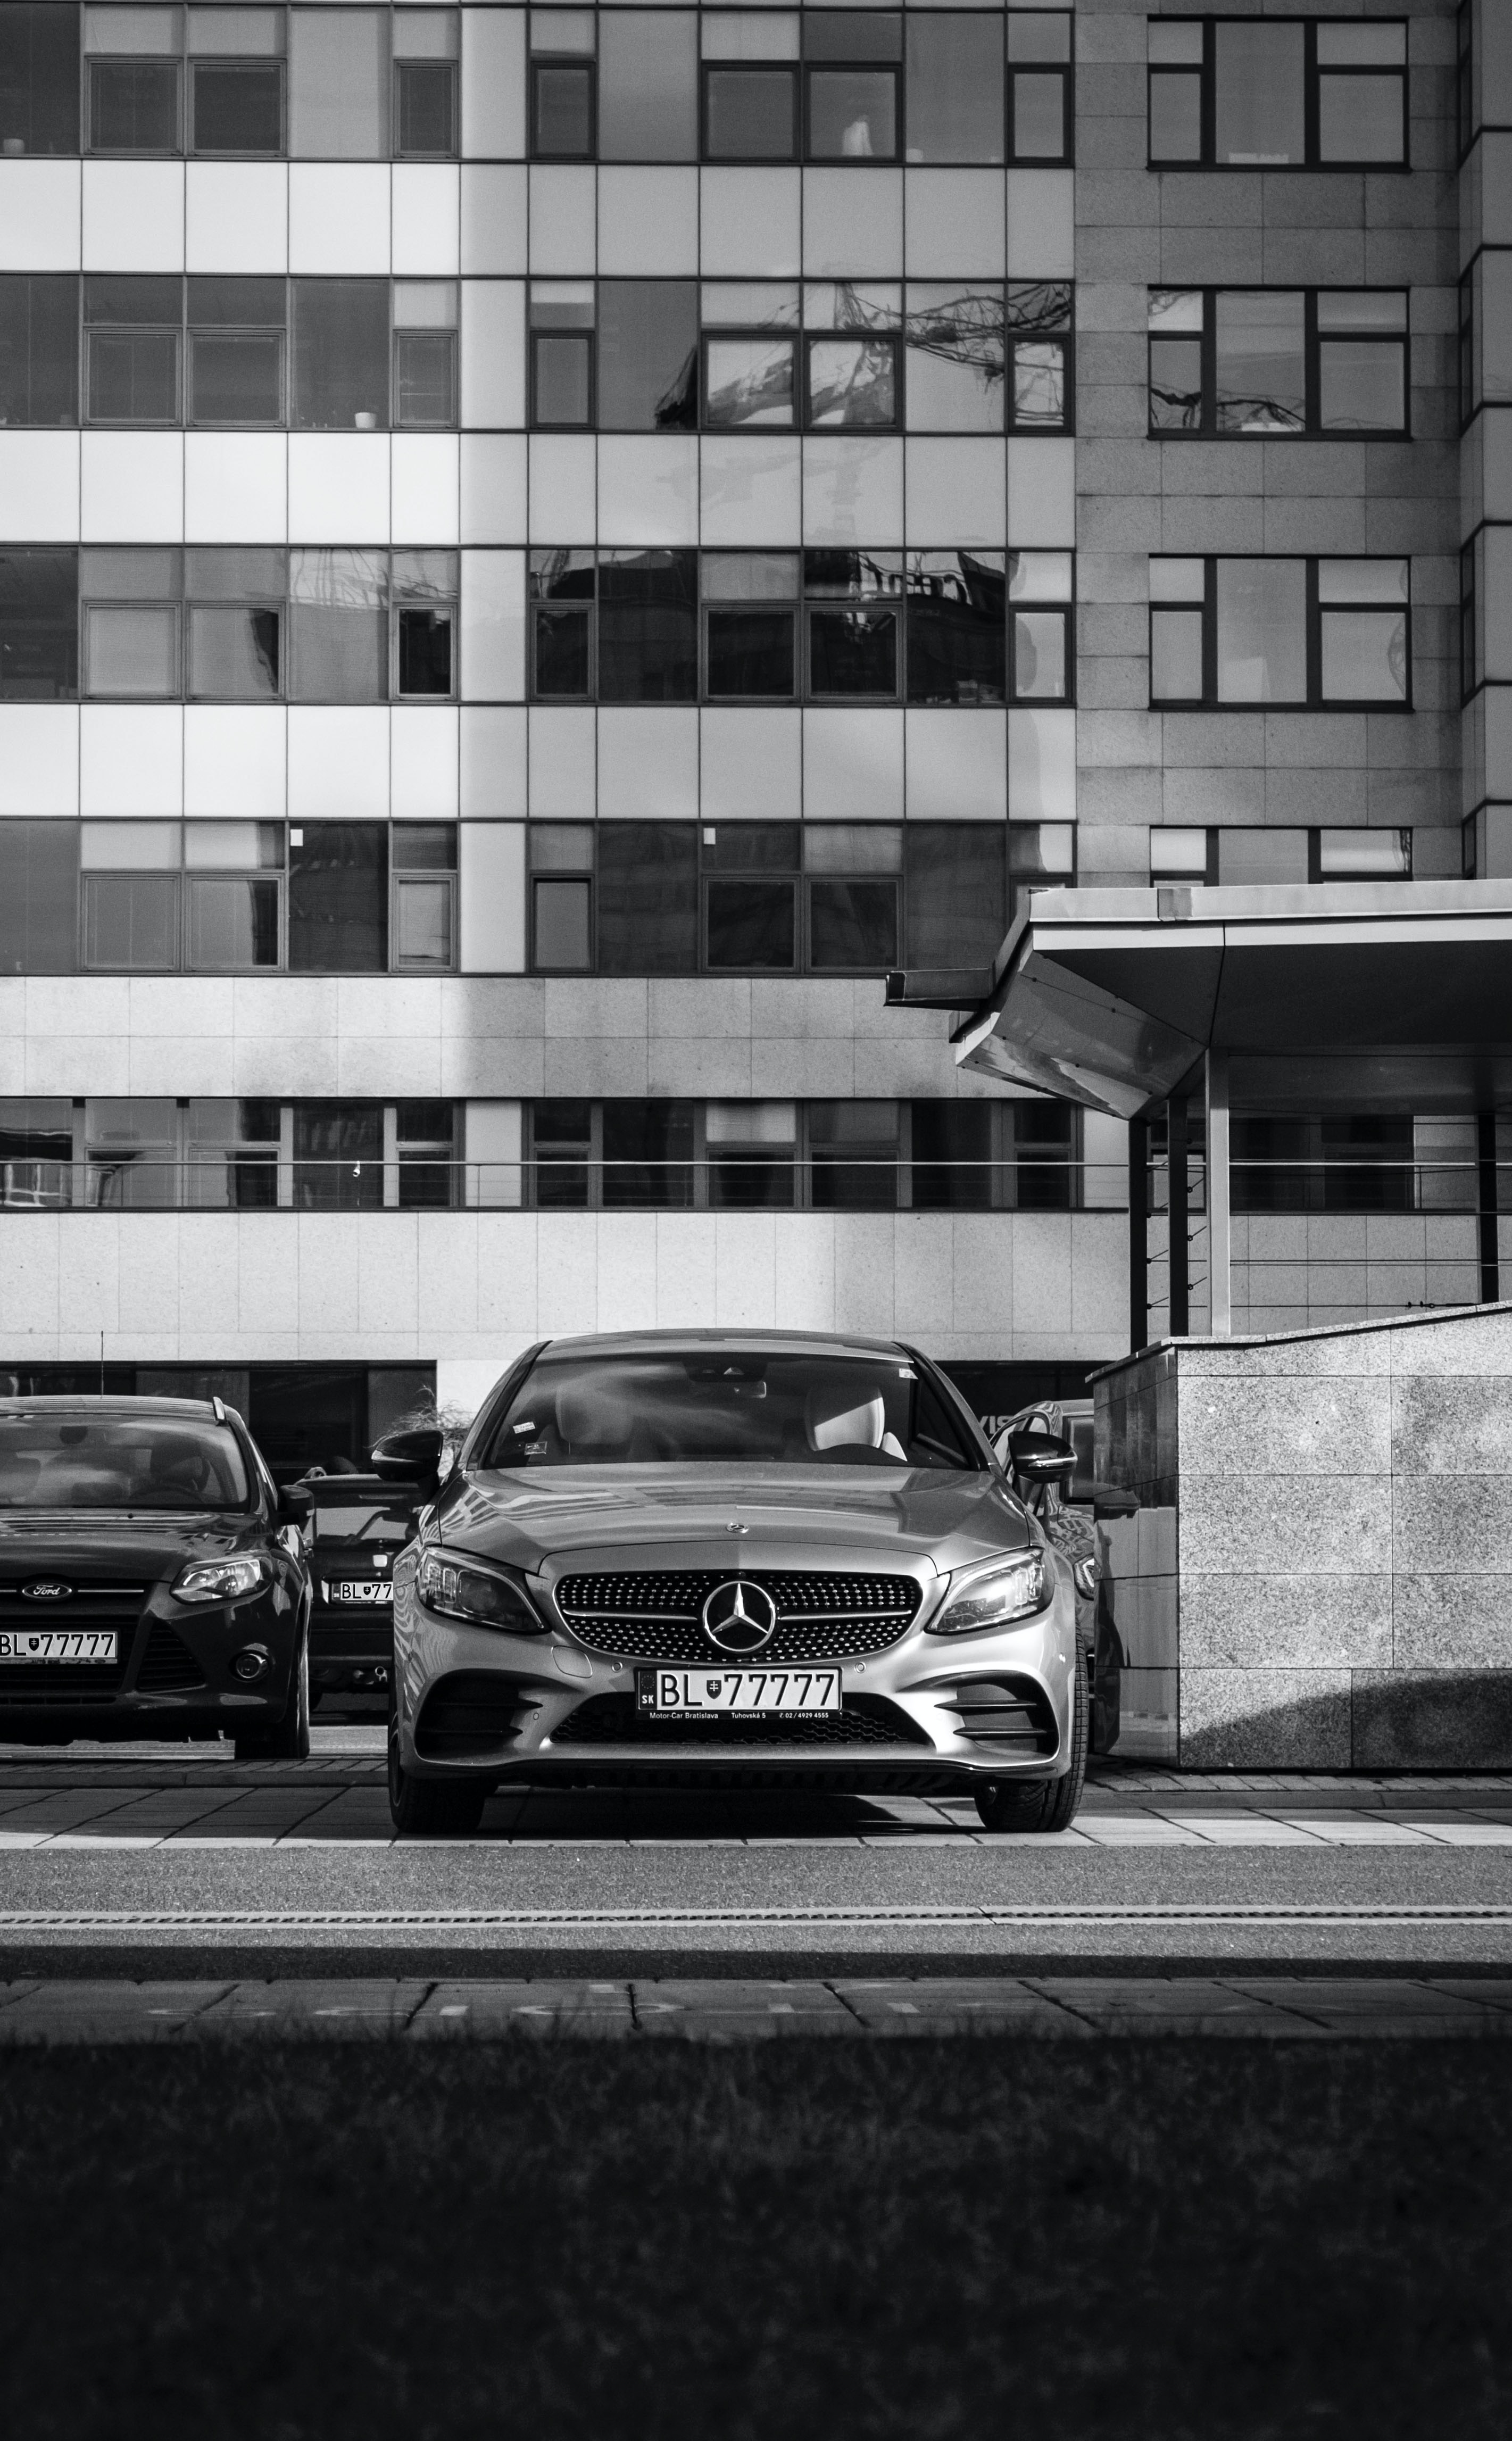 mercedes-benz, cars, car, front view, bw, chb